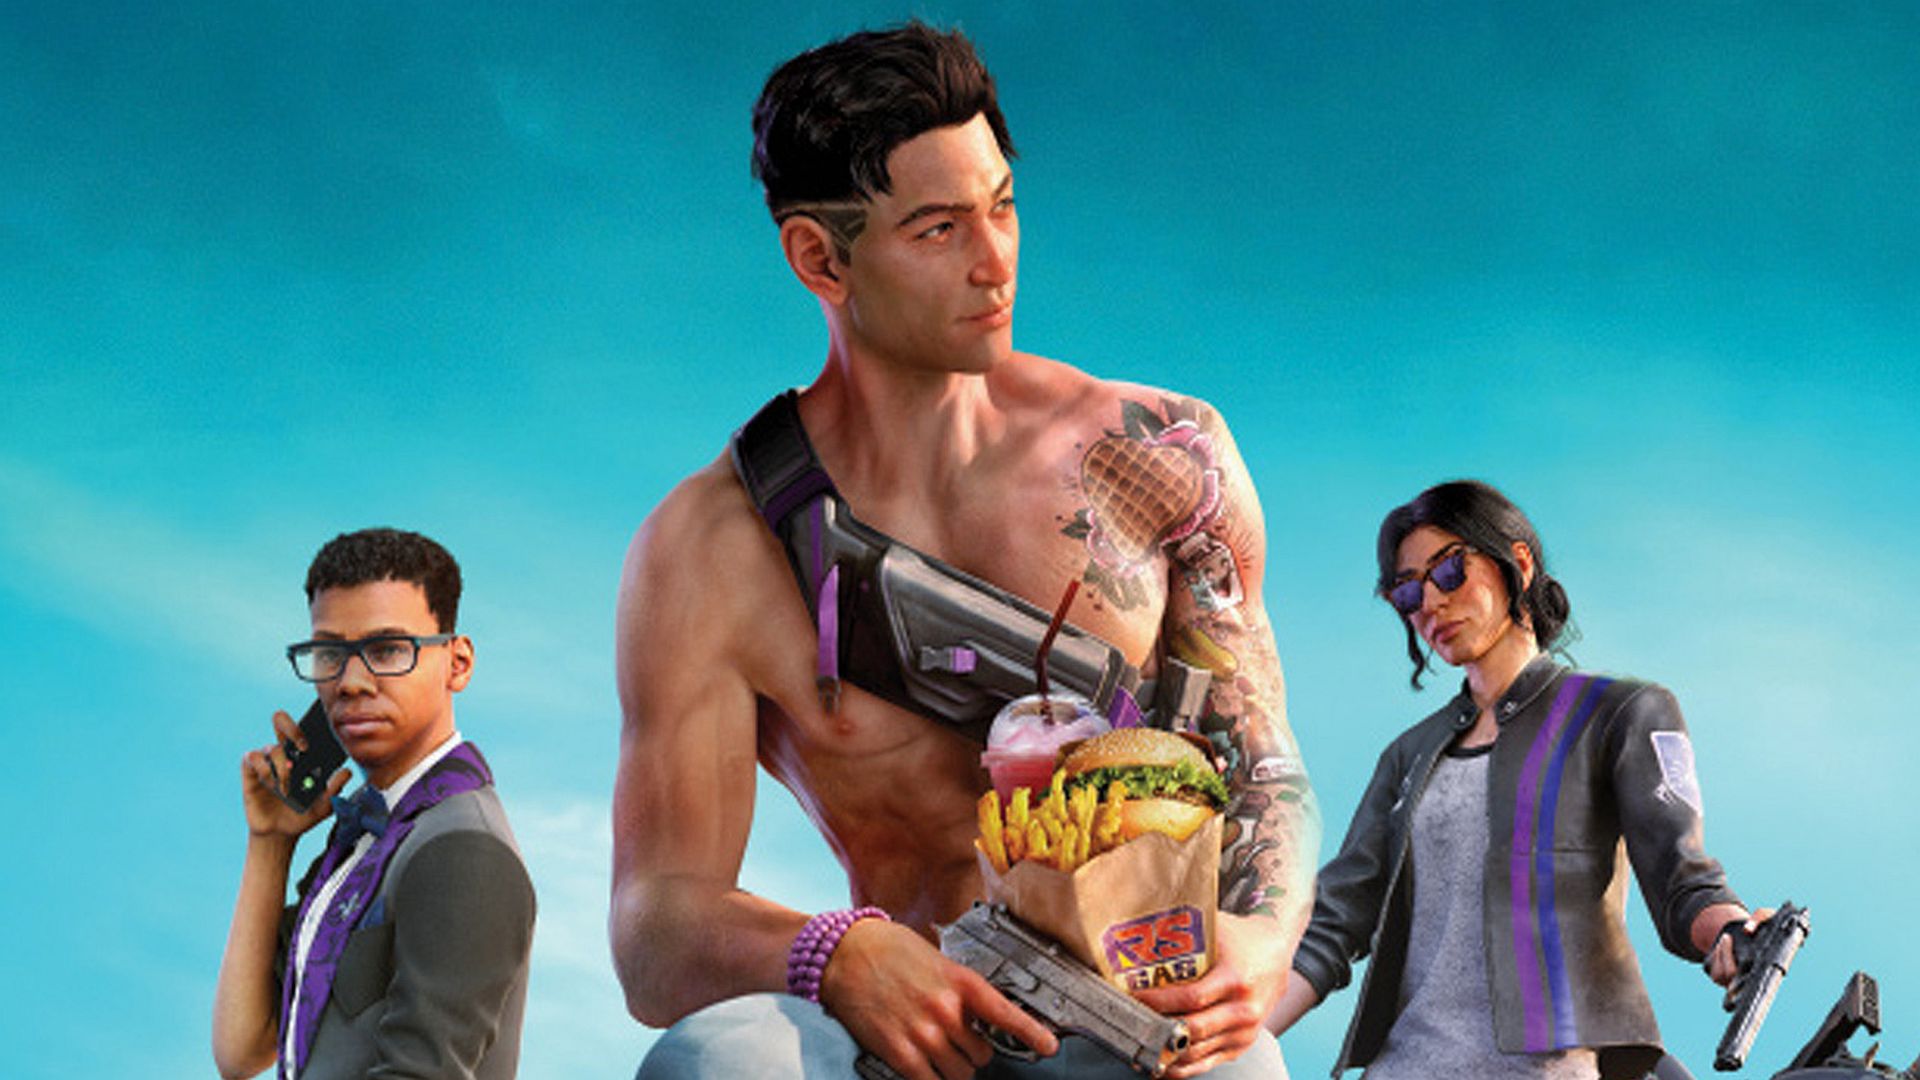 Saints Row has been pushed back to August 2022